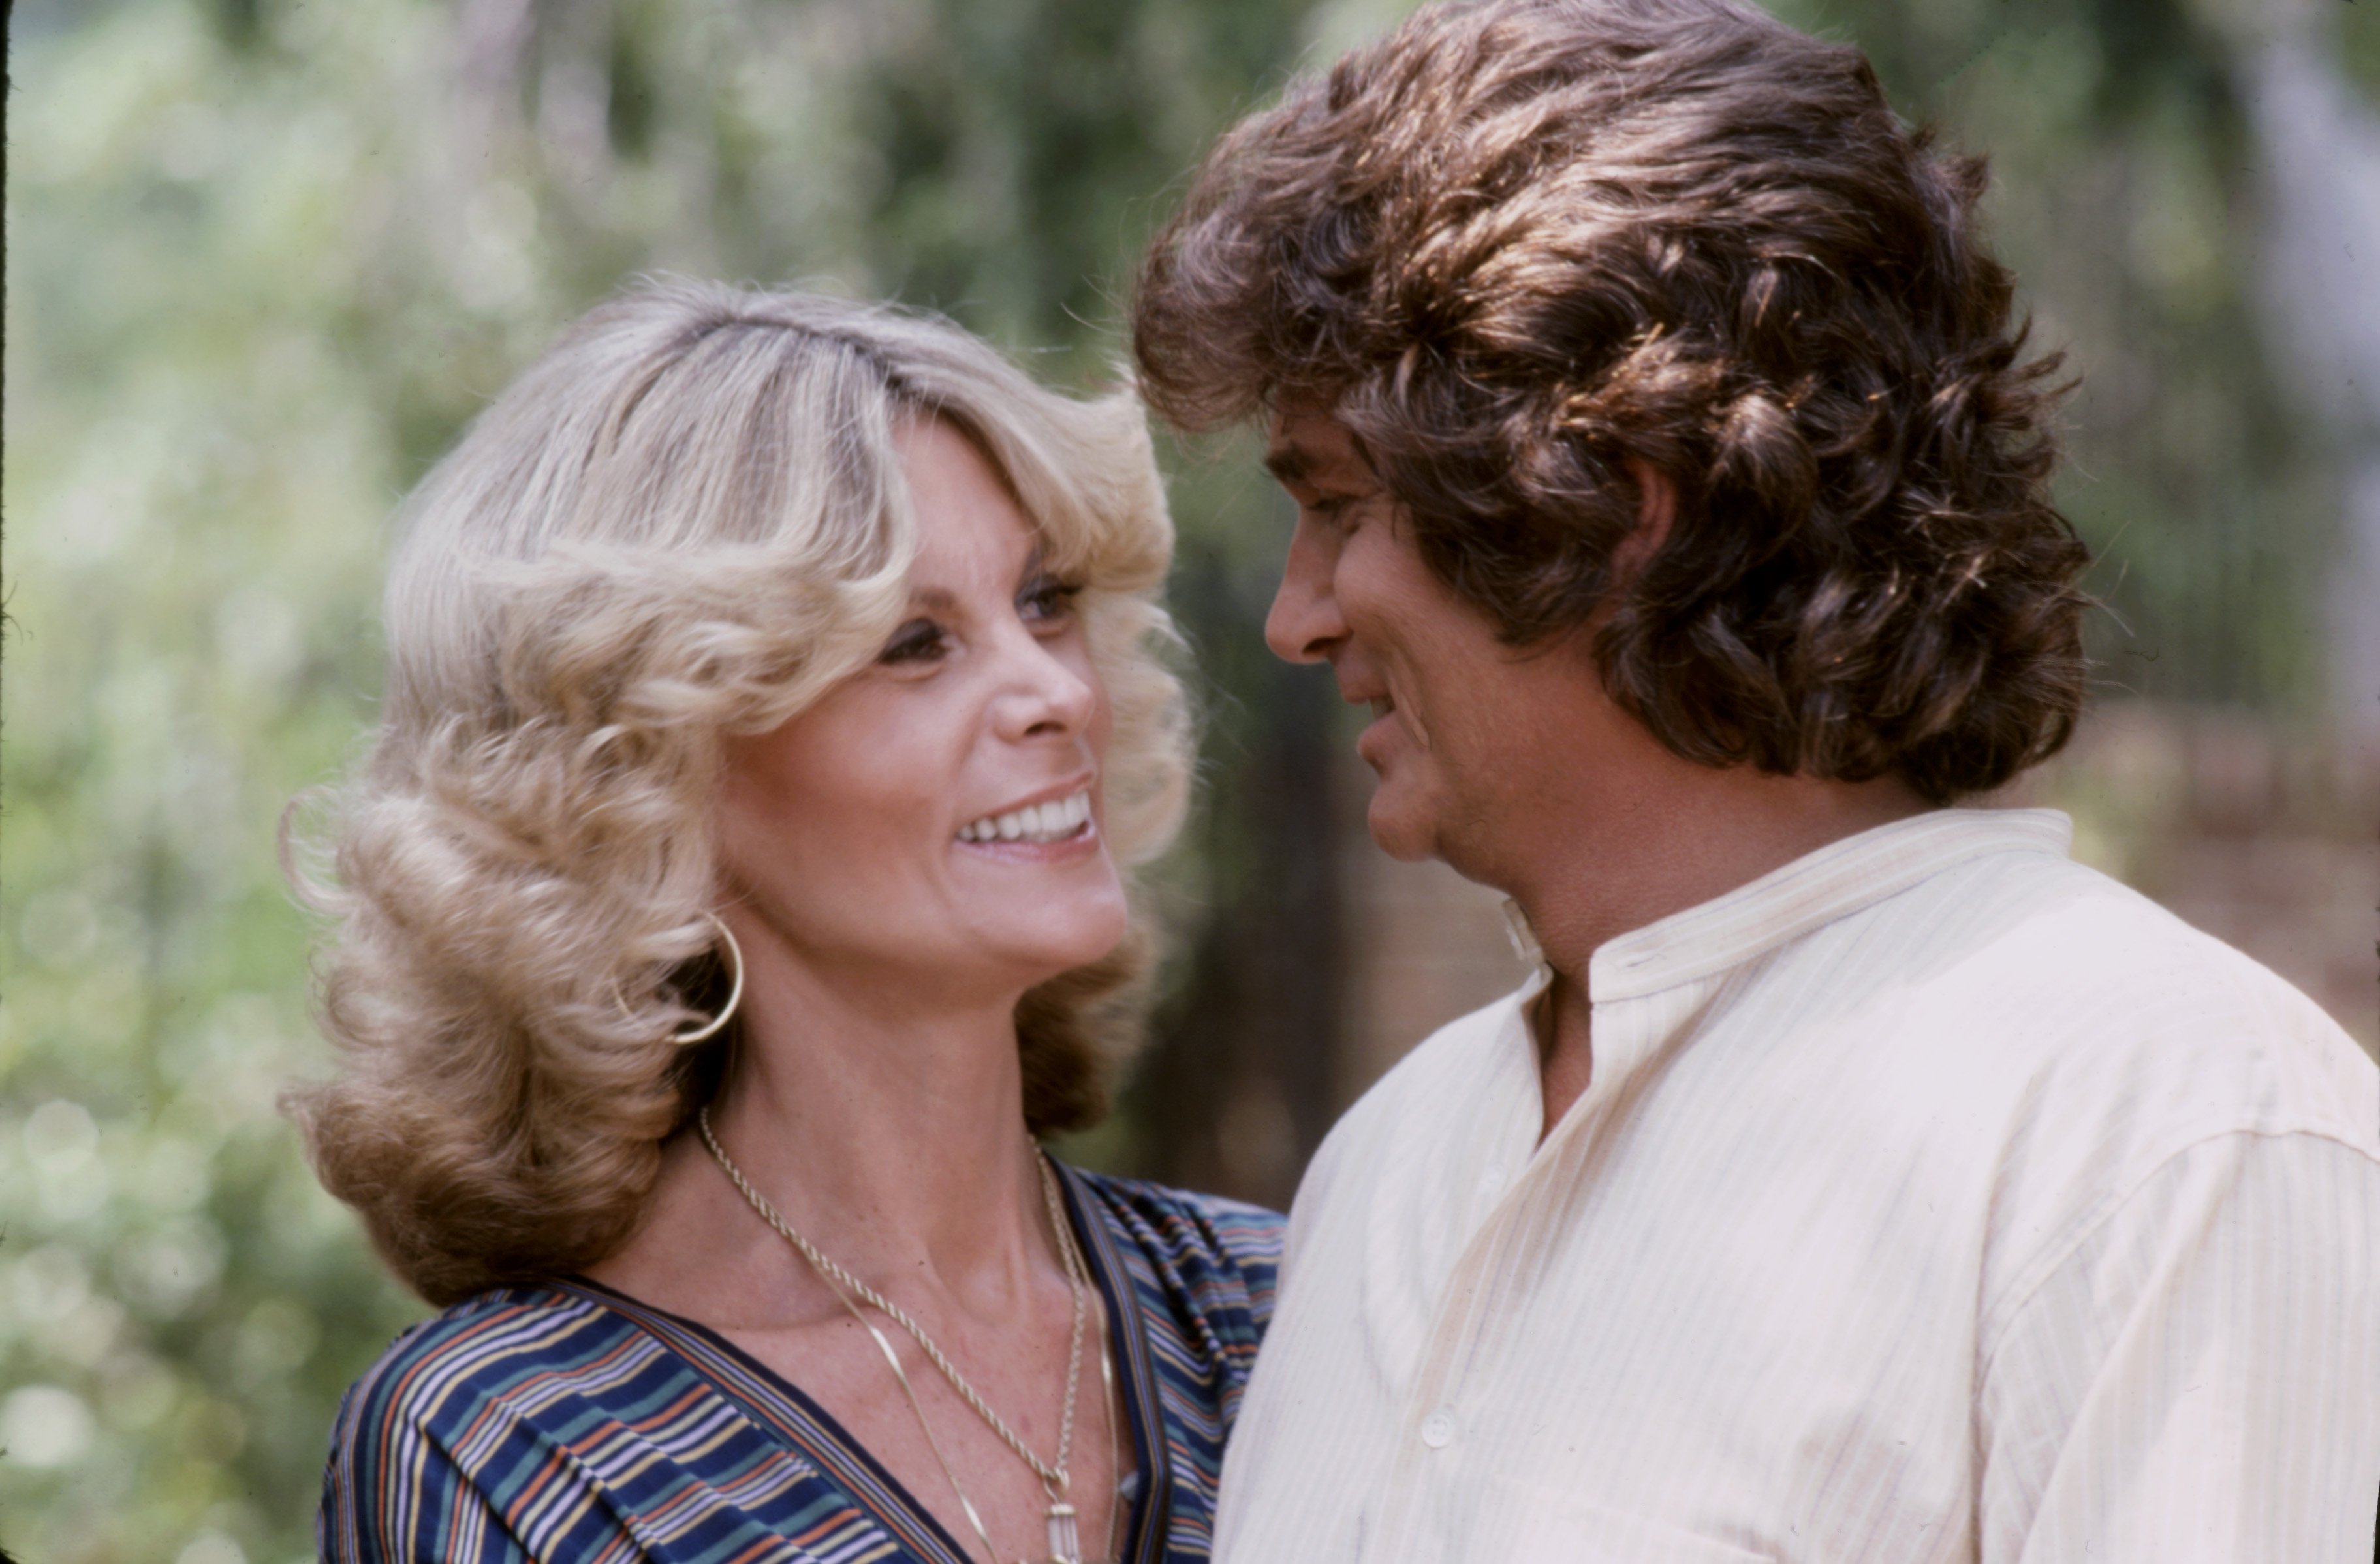 Lynn Noe Landon and spouse Michael Landon during their appearance on the ABC TV special "The Barbara Walters Special," in 1978. | Source: Getty Images